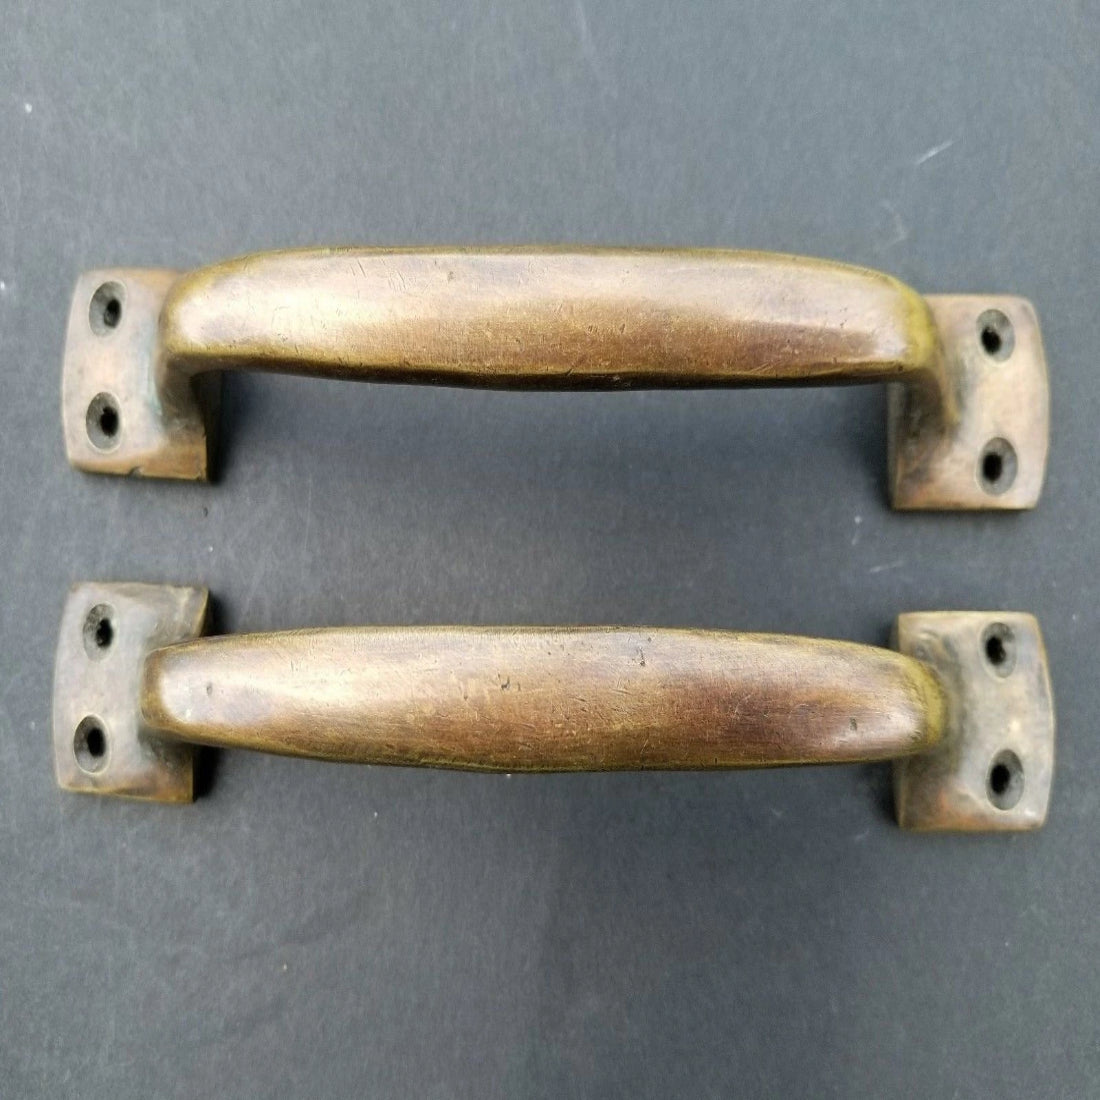 2 Large Solid Antique brass large strong file cabinet trunk handles 6 7/8" #P9